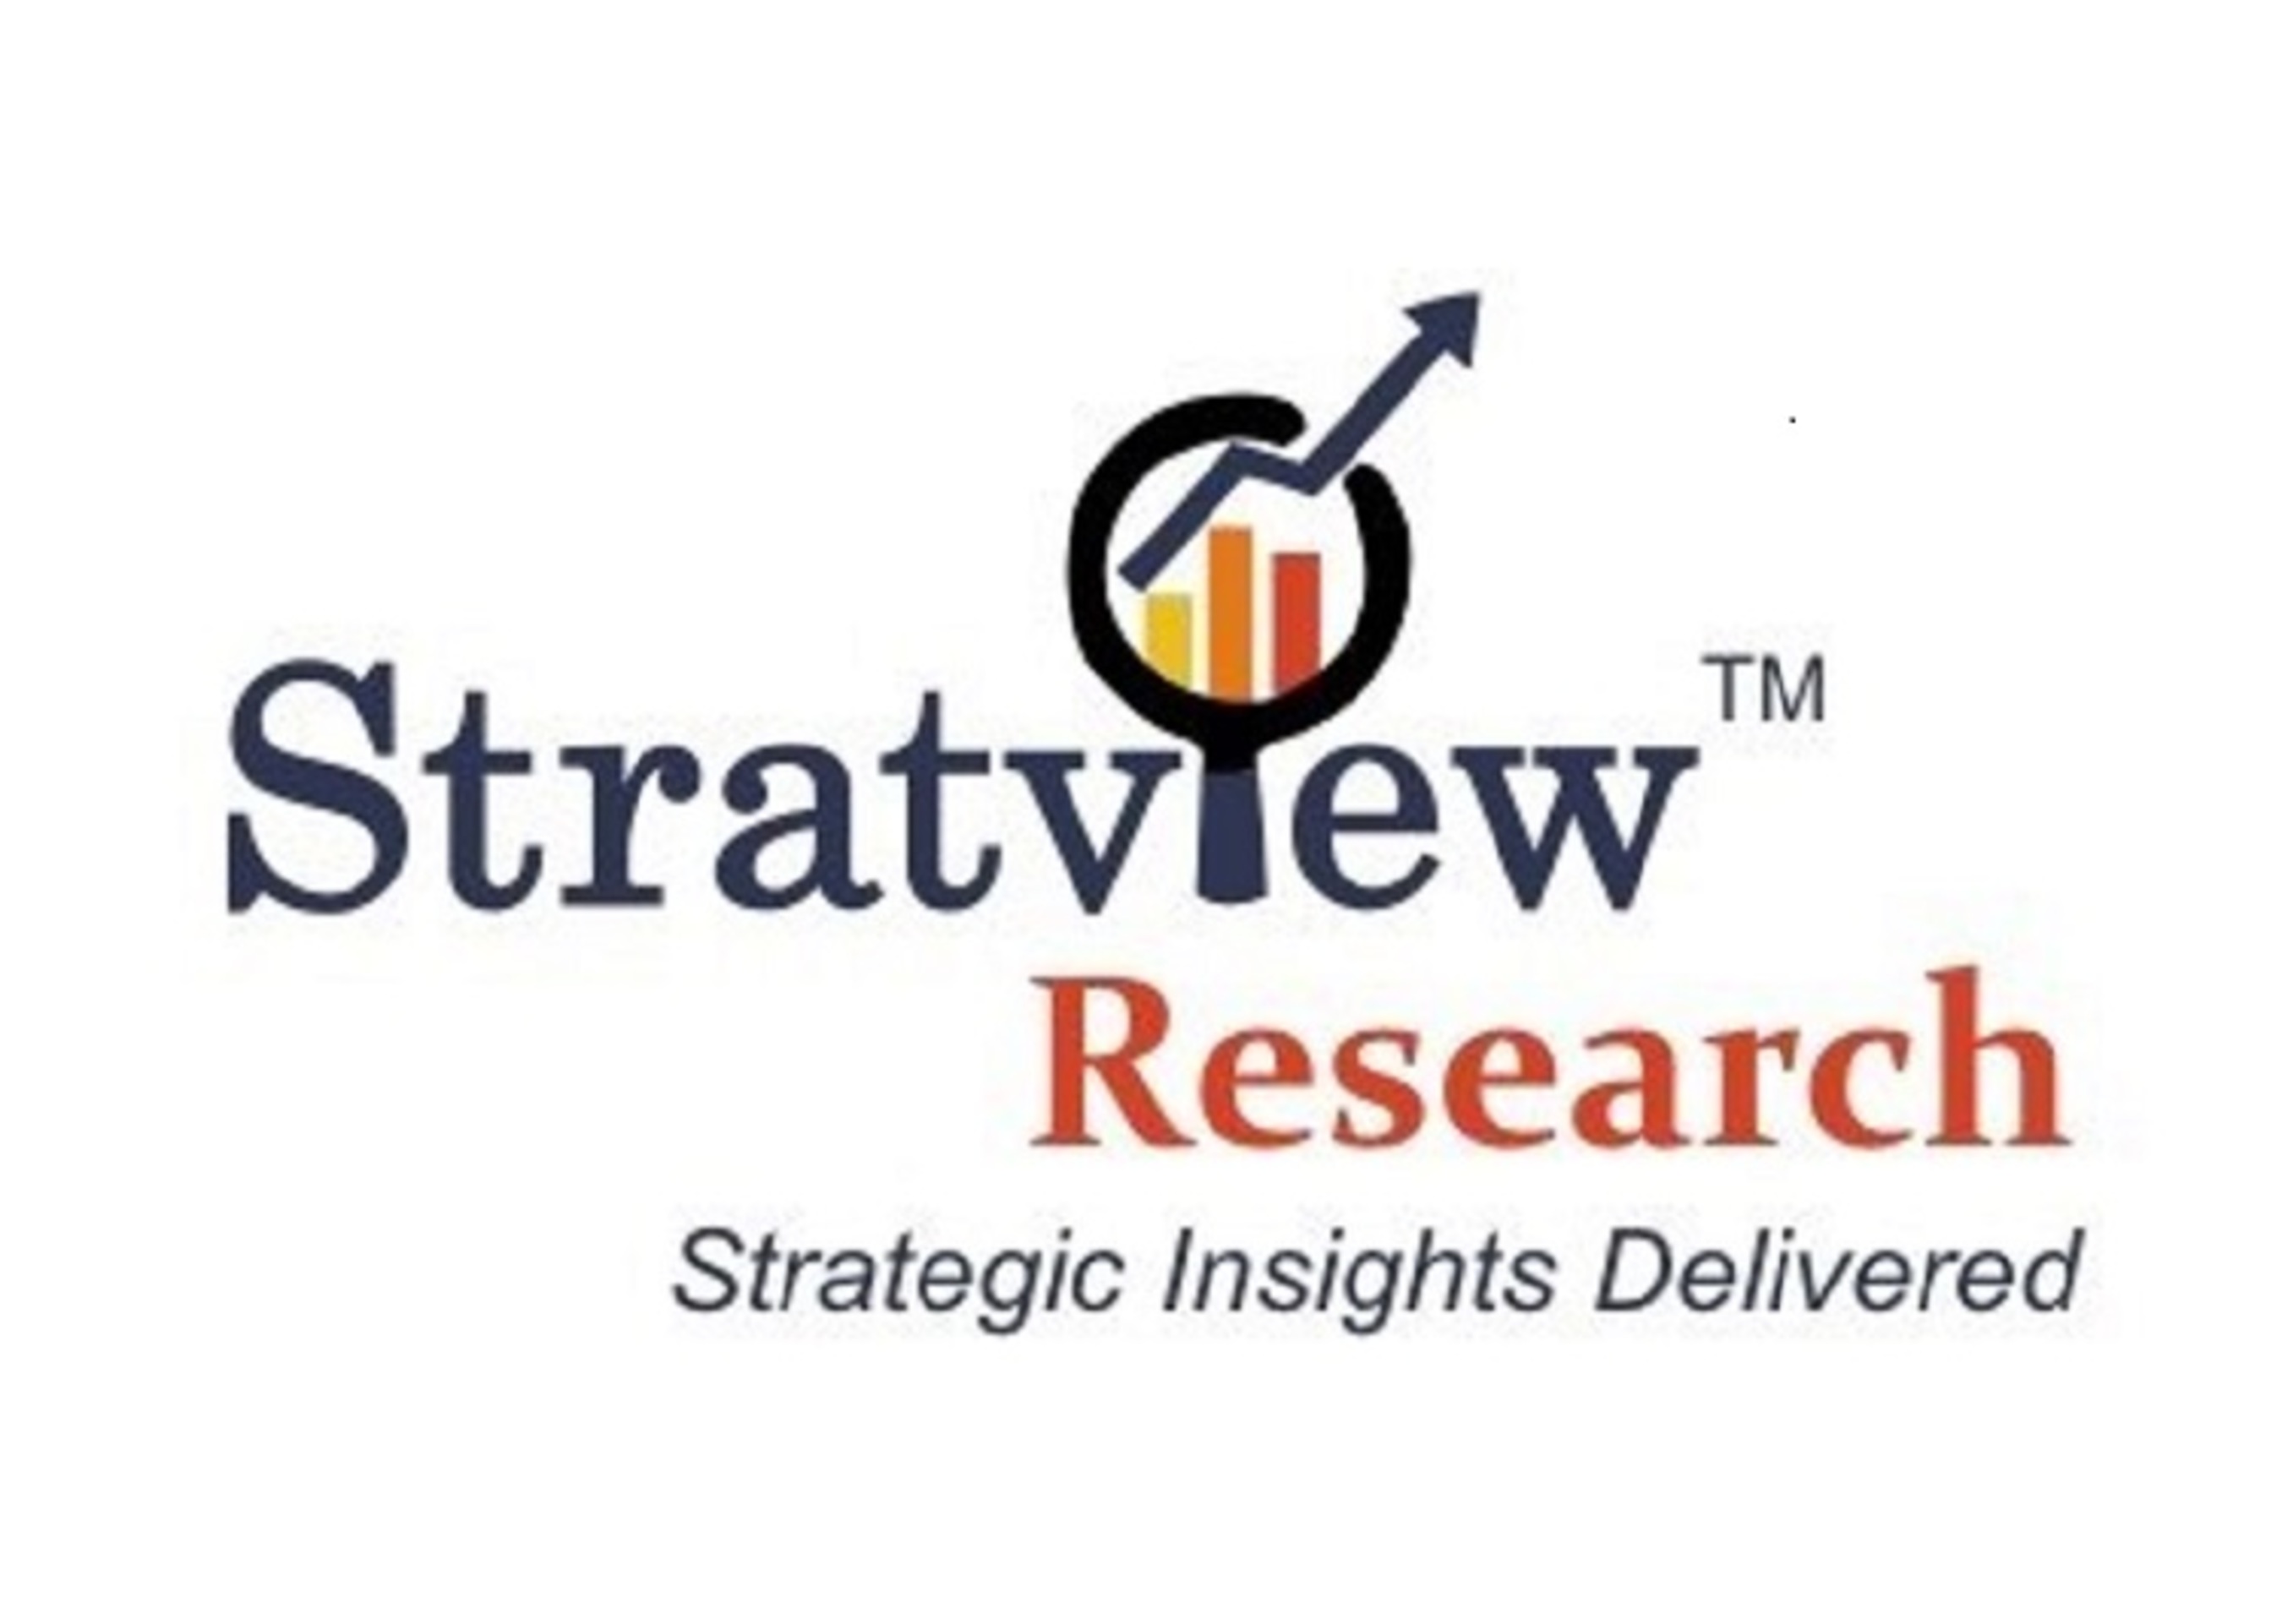 Stratview Research Logo (PRNewsFoto/Stratview Research)